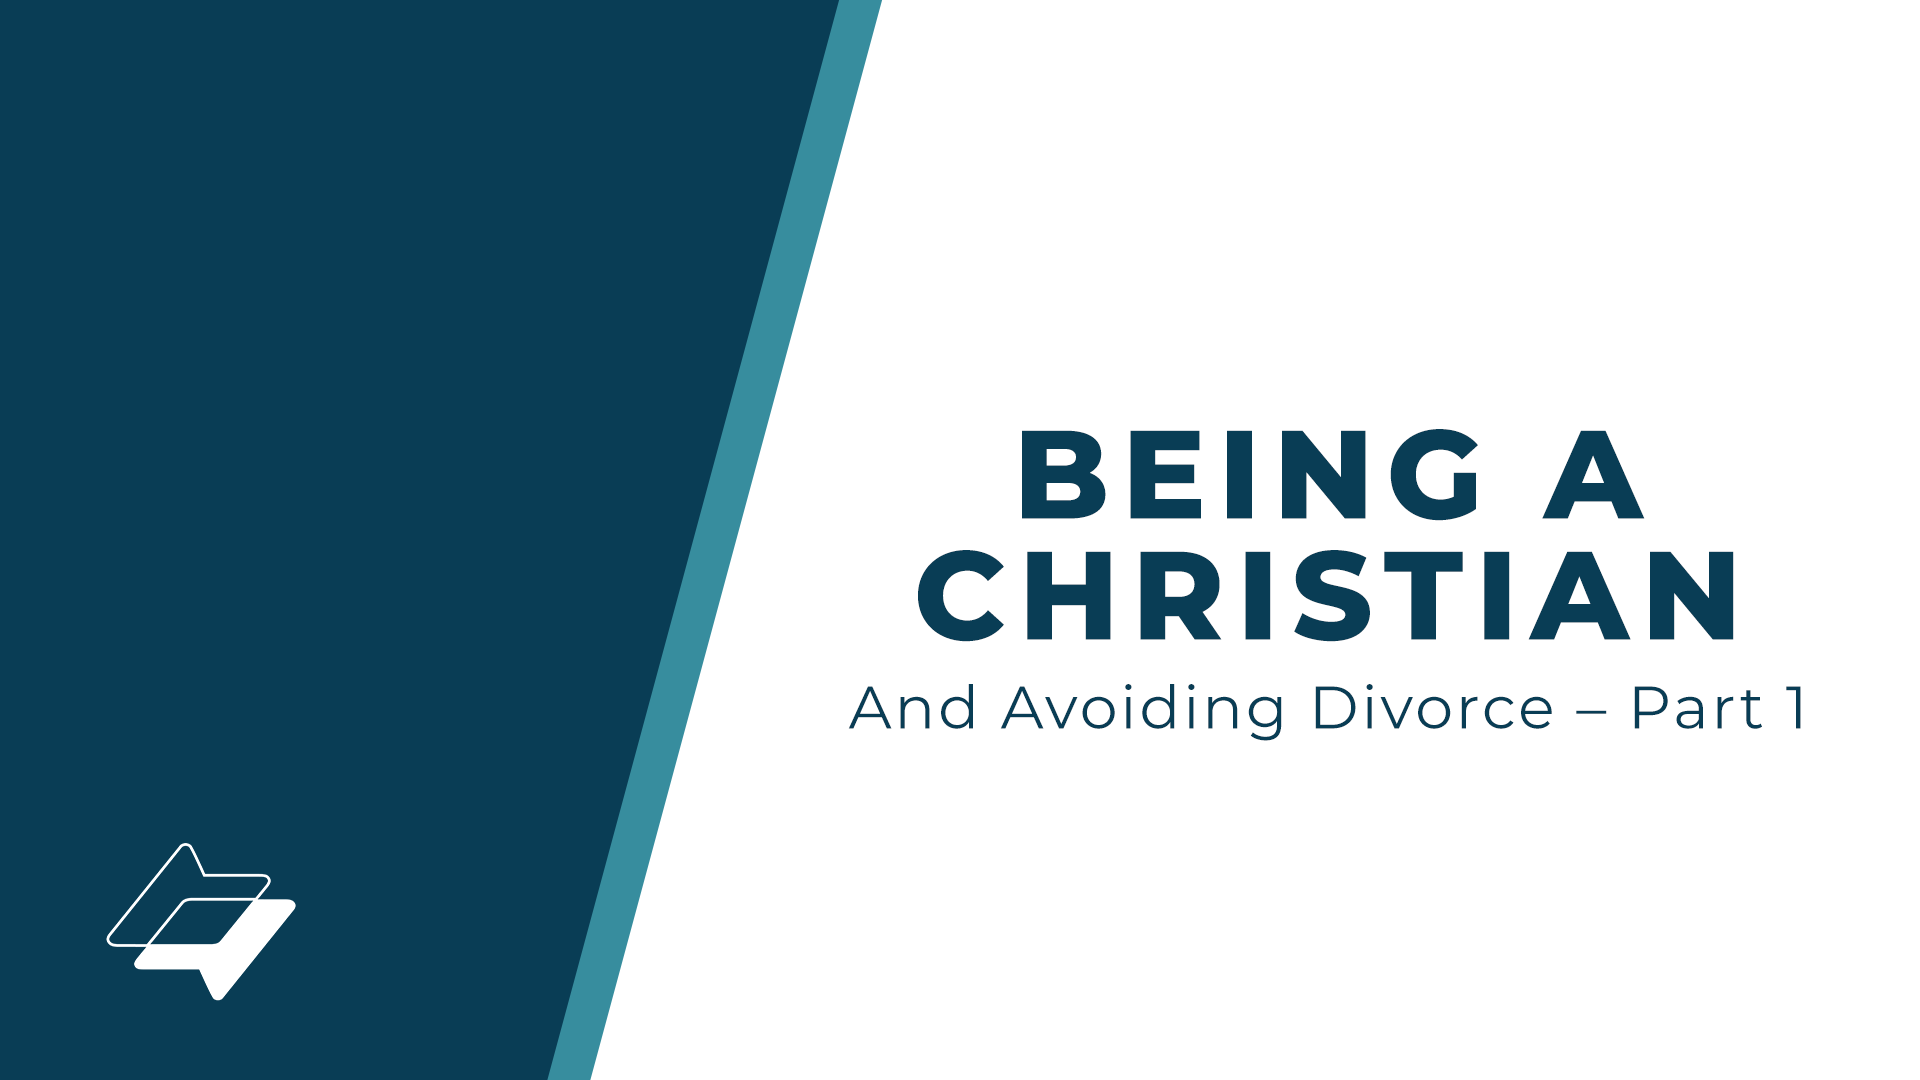 Being a Christian and Avoiding Divorce – Part 1